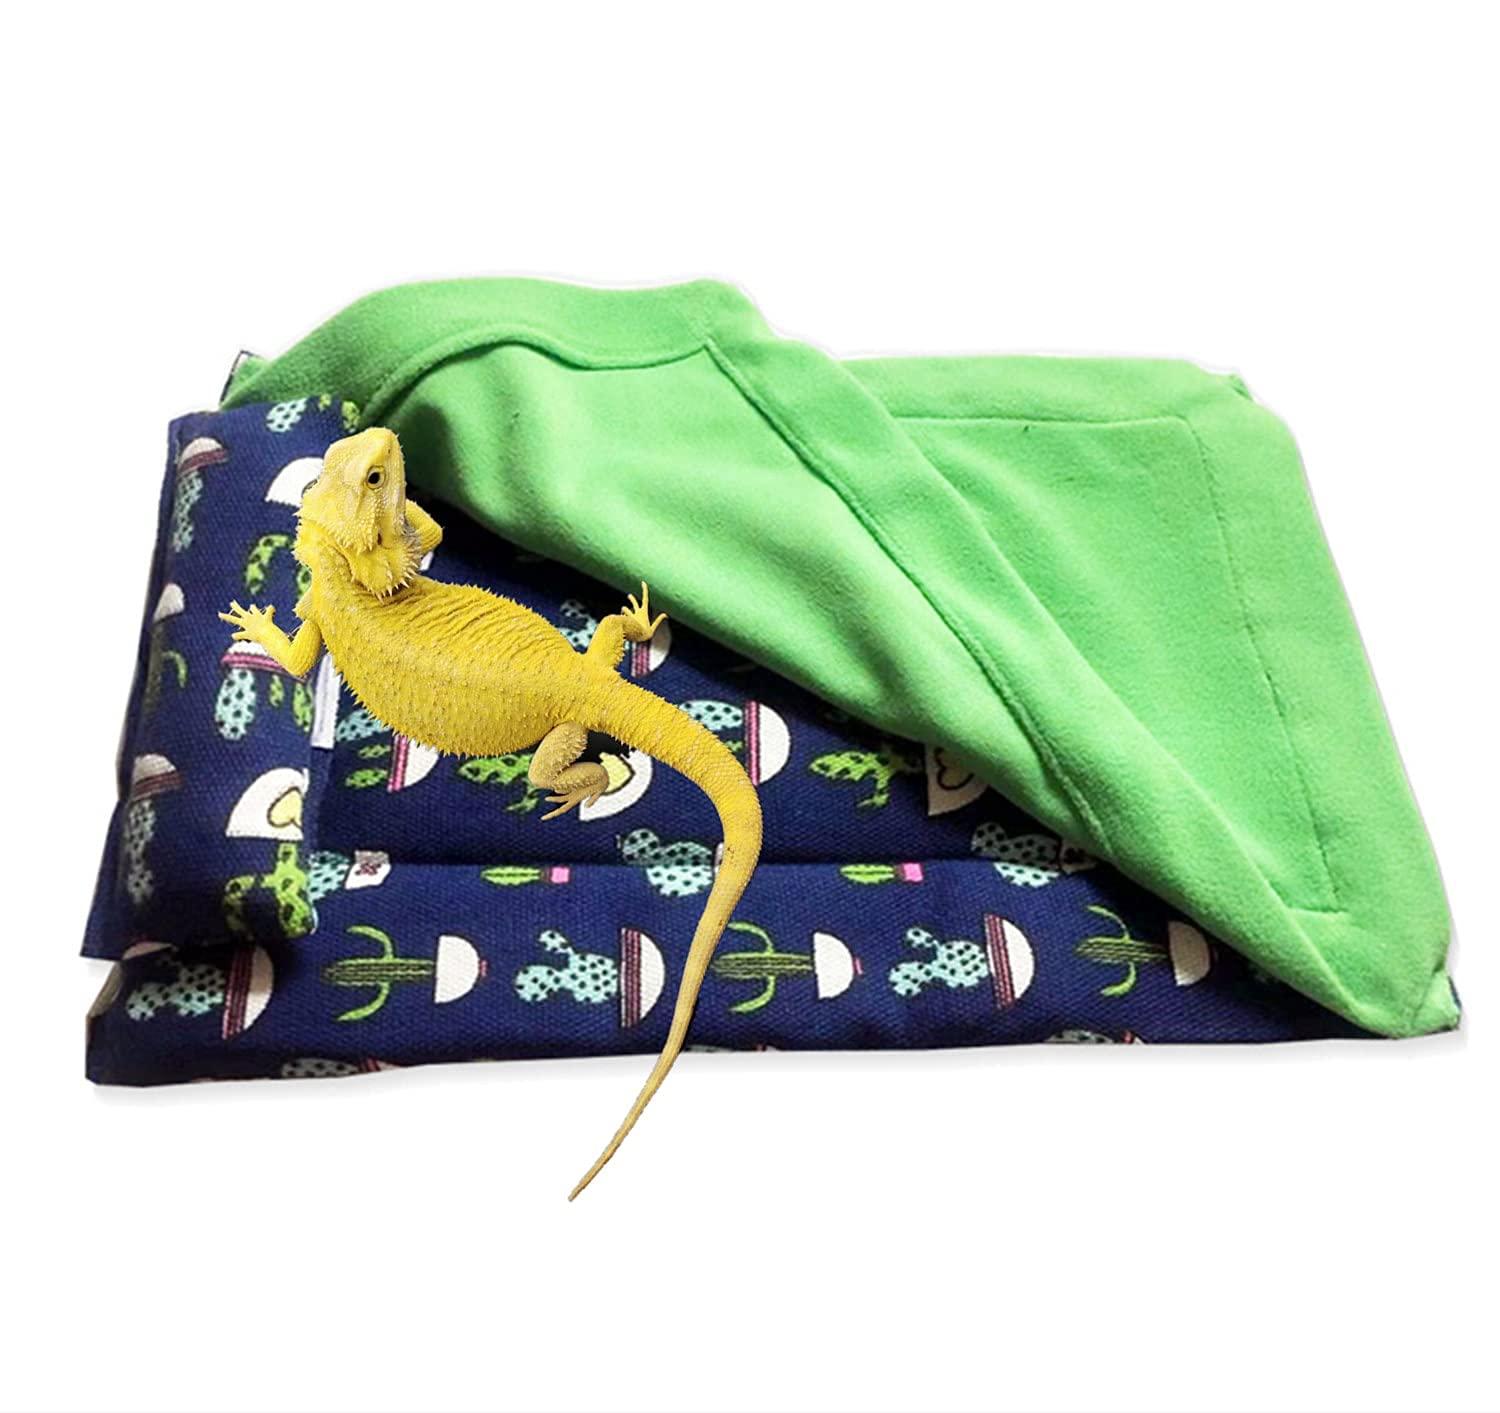 Bearded Dragon Bed with Pillow and Blanket, Reptile Accessories, Small Pet Animal Hide Habitat Shelter, Solf Fabric Warm Sleeping Bag with cover for Bearded Dragon, Leopard gecko, Lizard